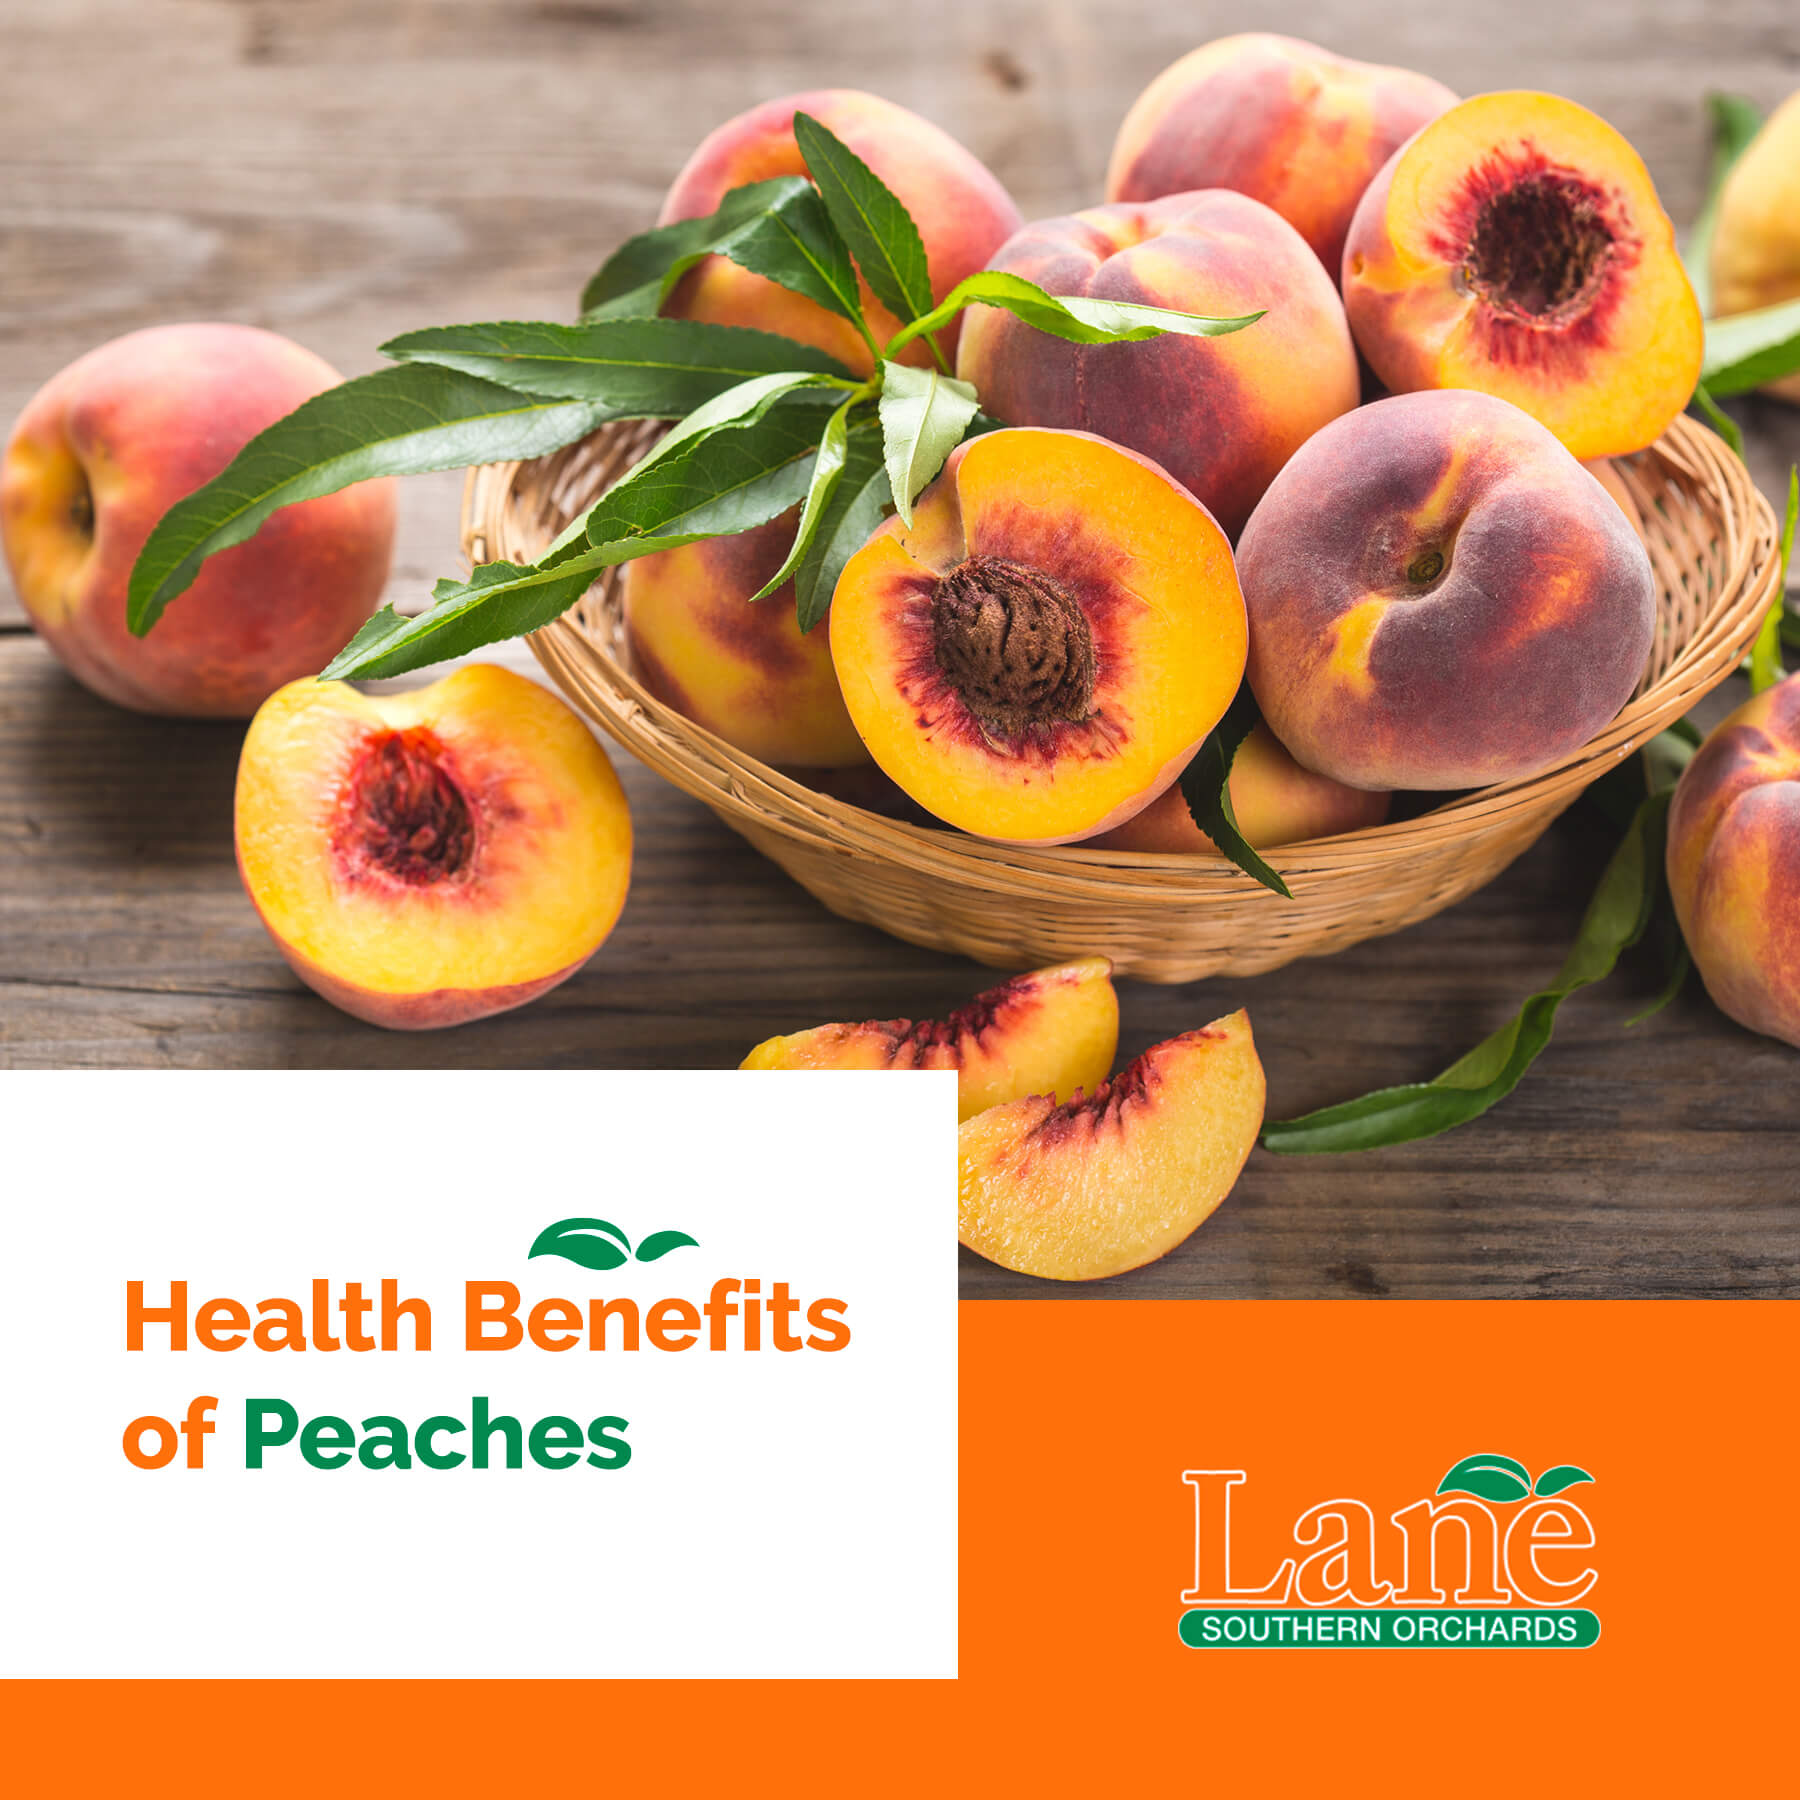 Health Benefits of Eating Peaches